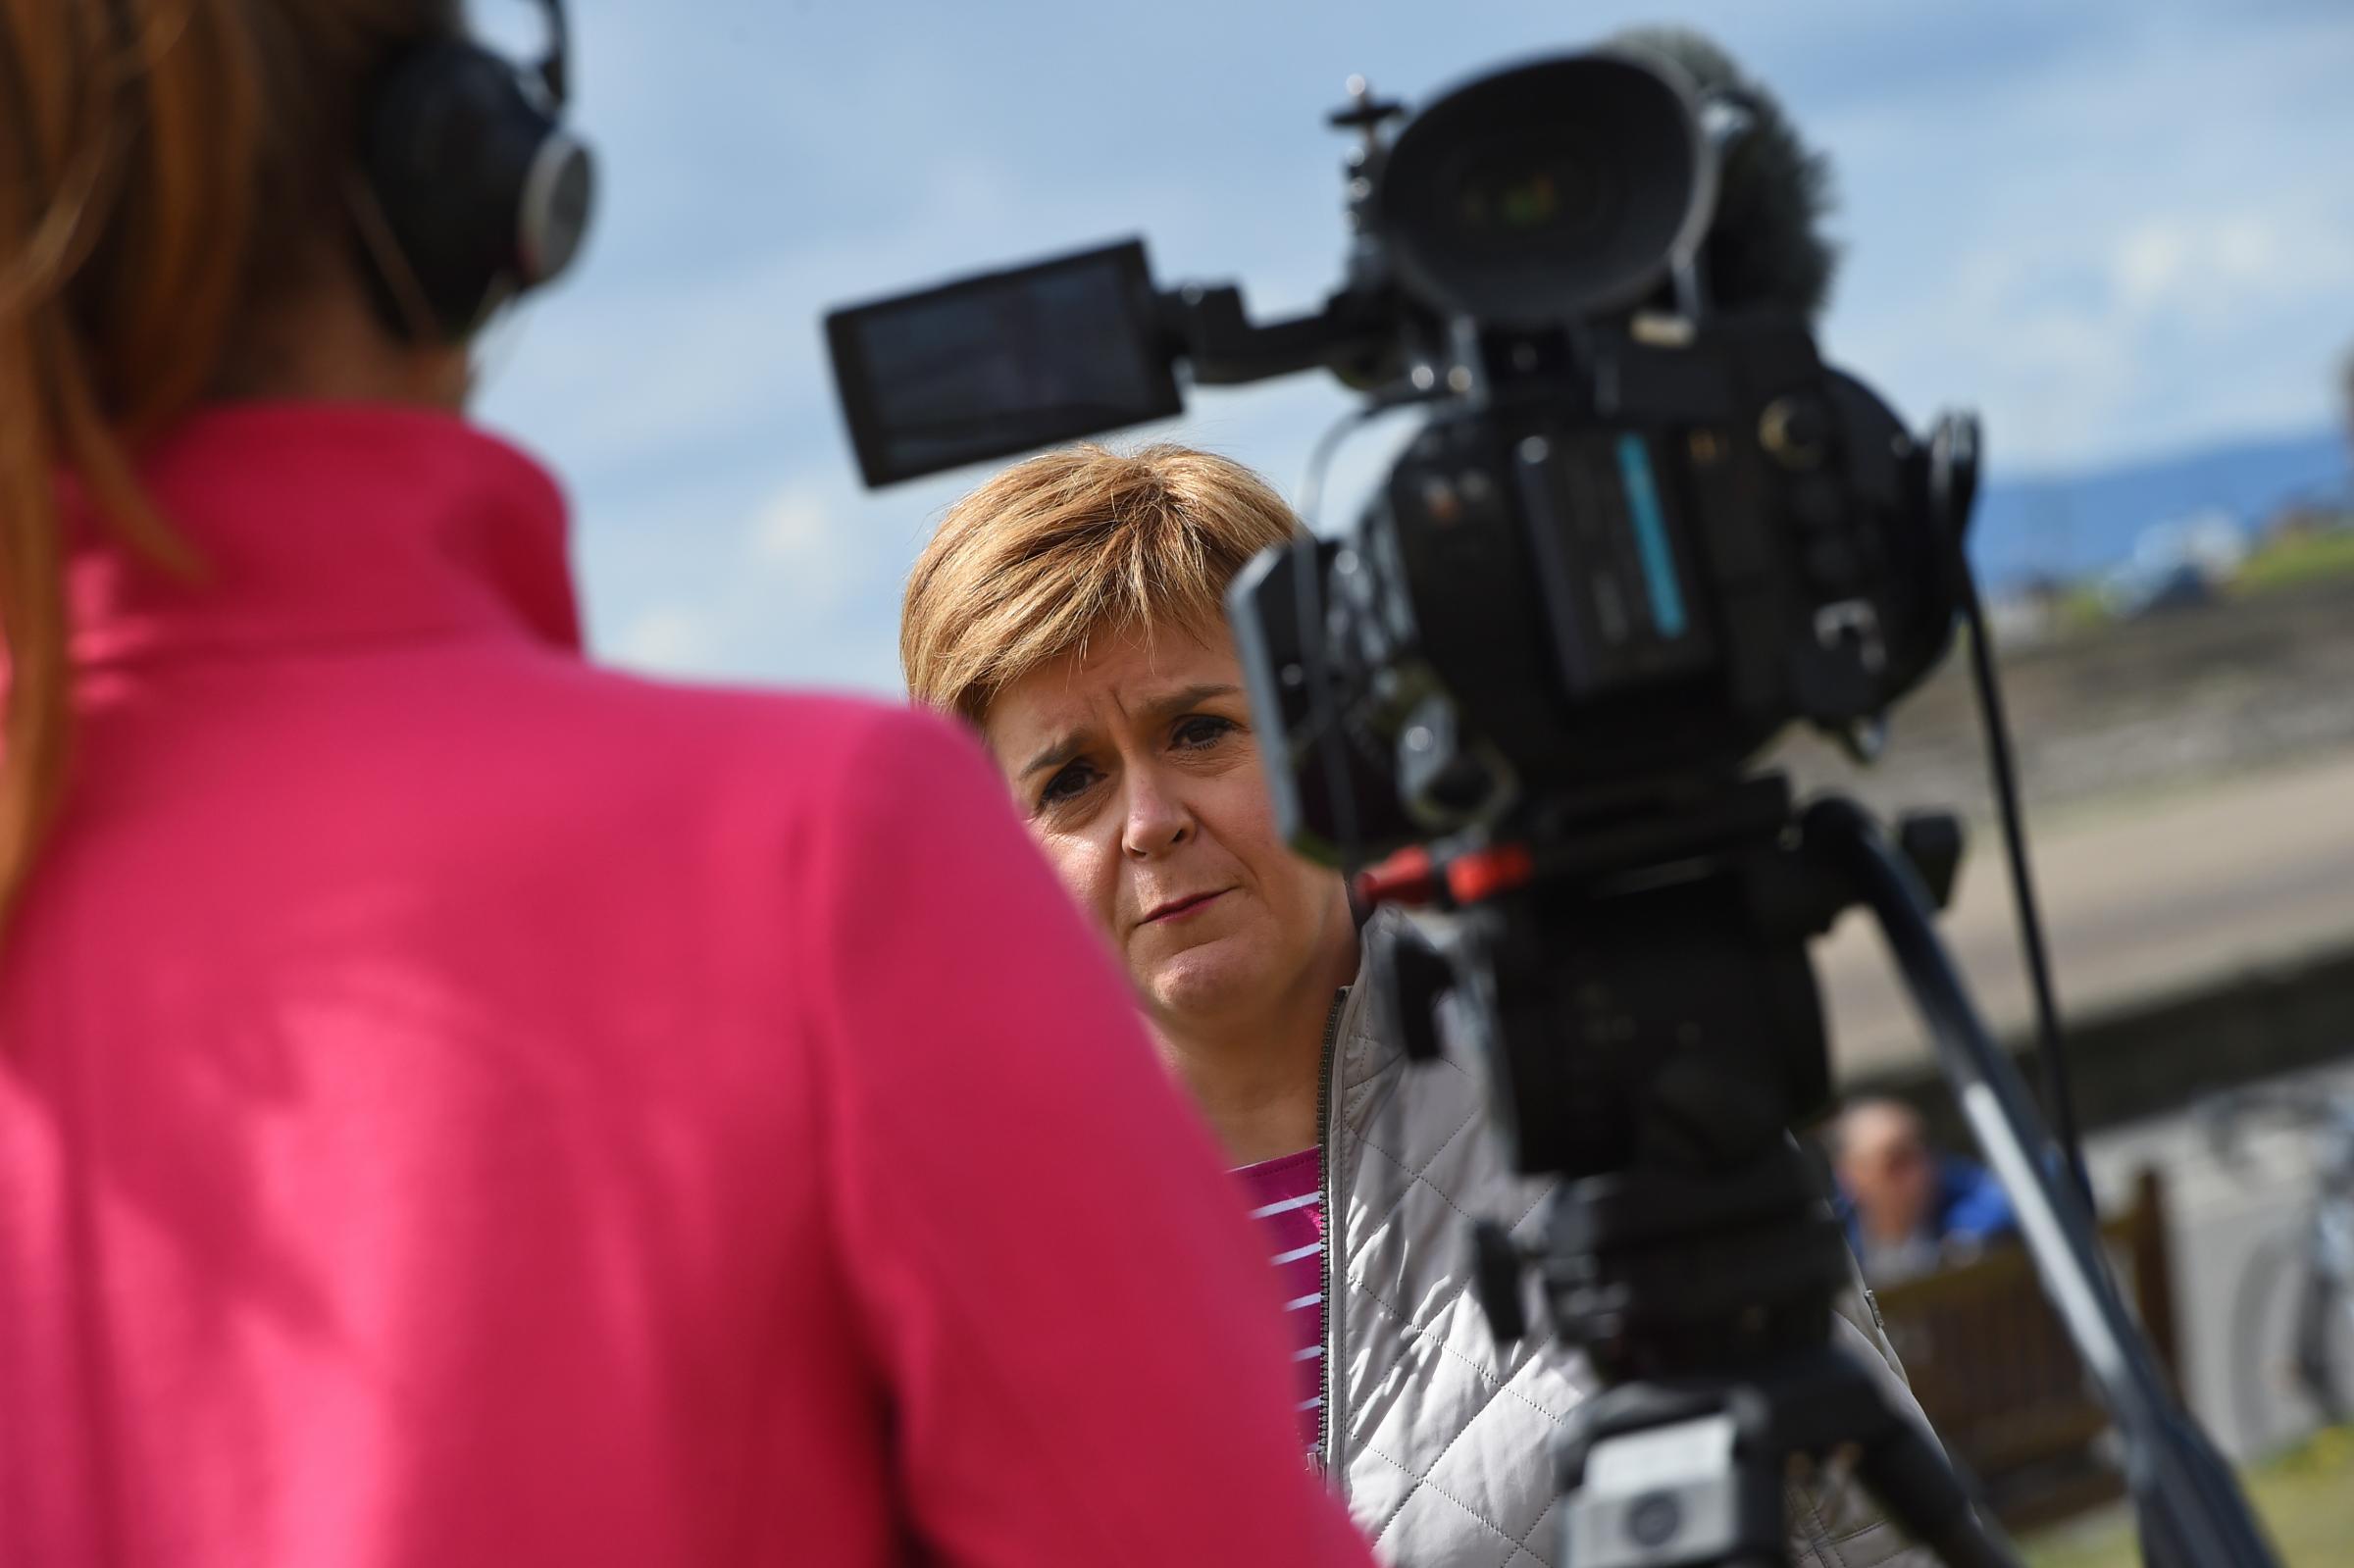 Nicola Sturgeon says she is only ‘serious leader’ for Scotland